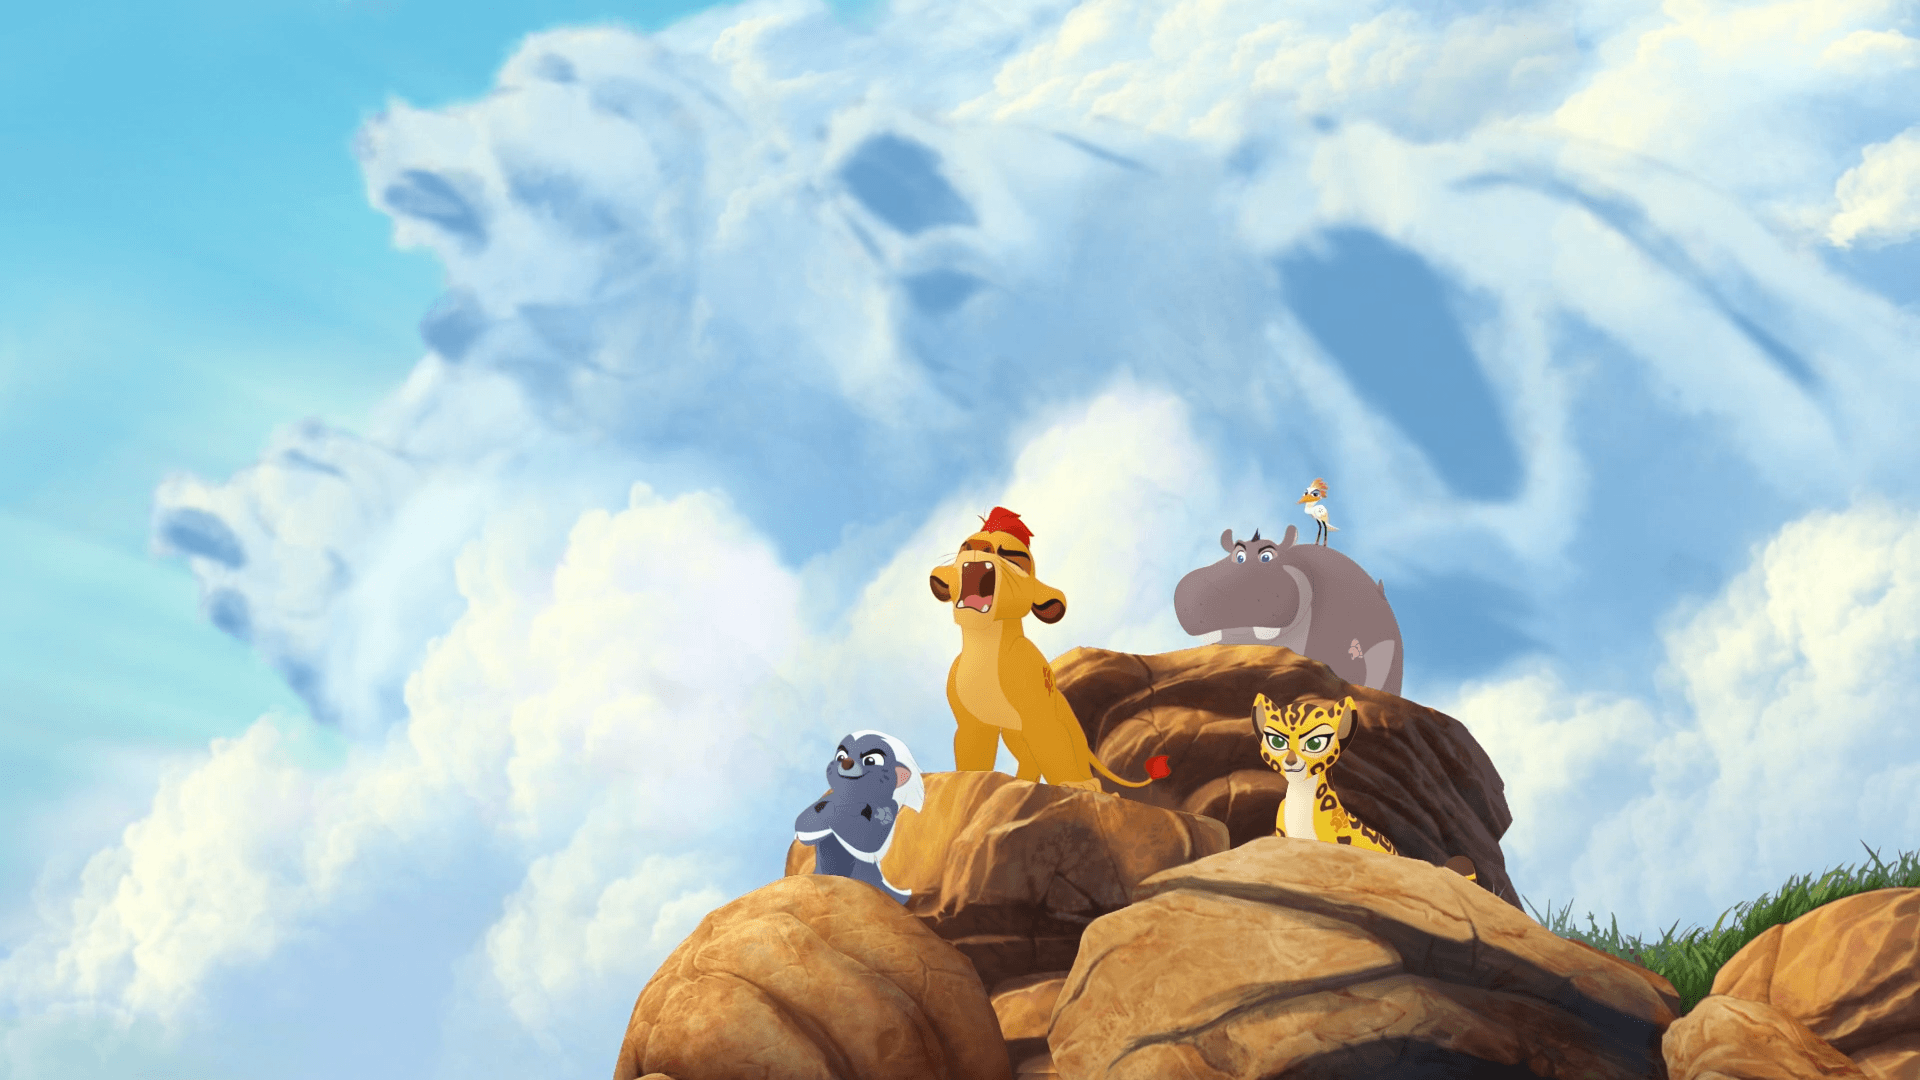 Call of the Guard (The Lion Guard Theme). The Lion King